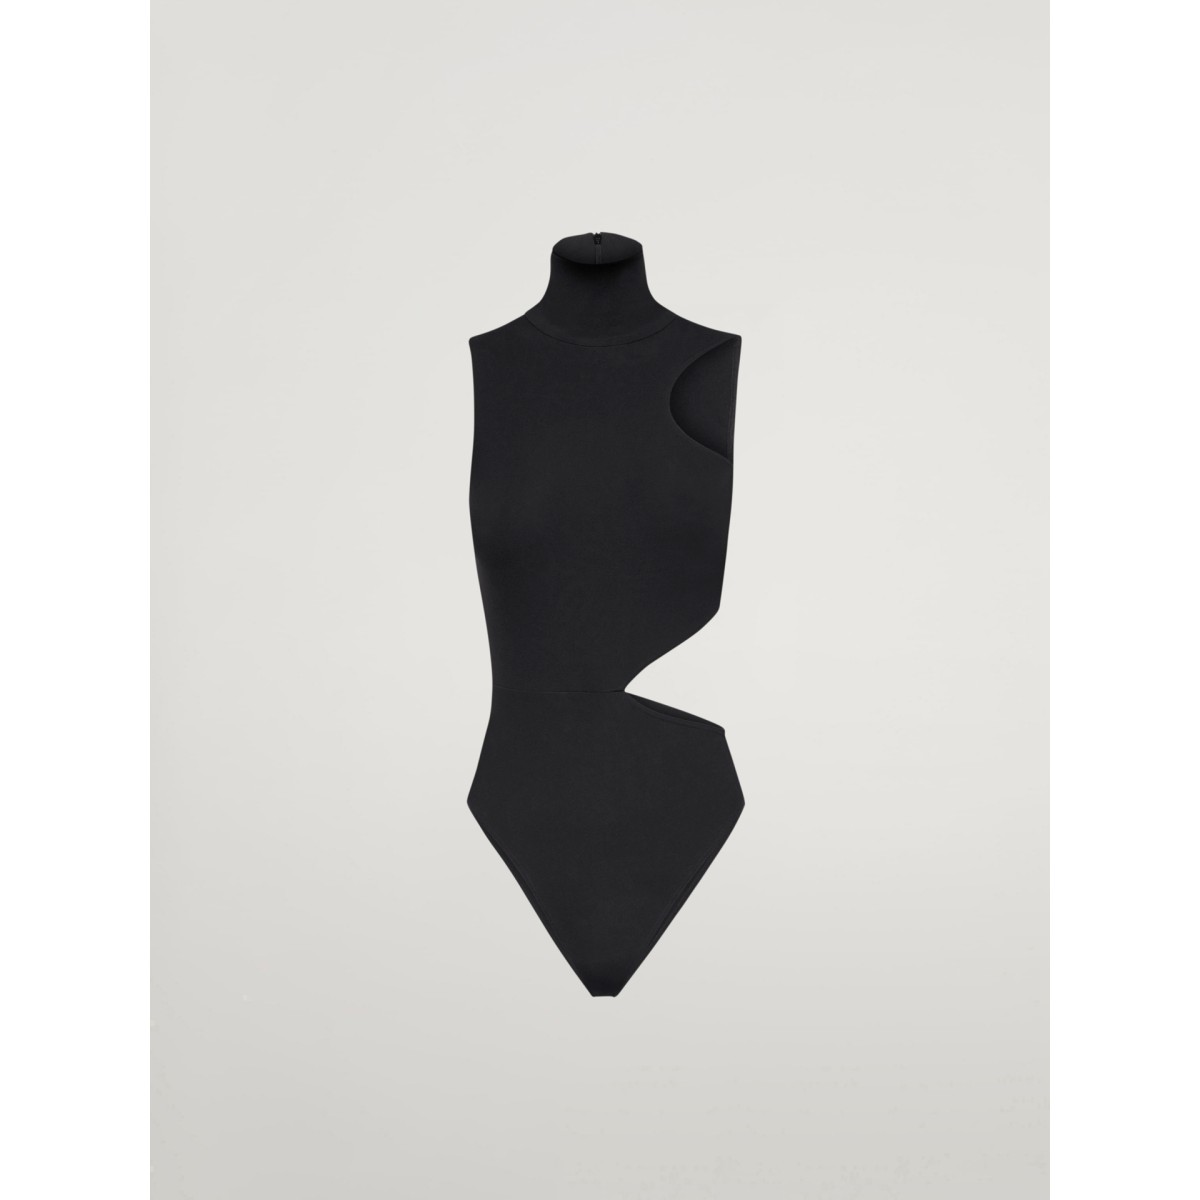 Wolford "Warm up" stand-up collar bodysuit